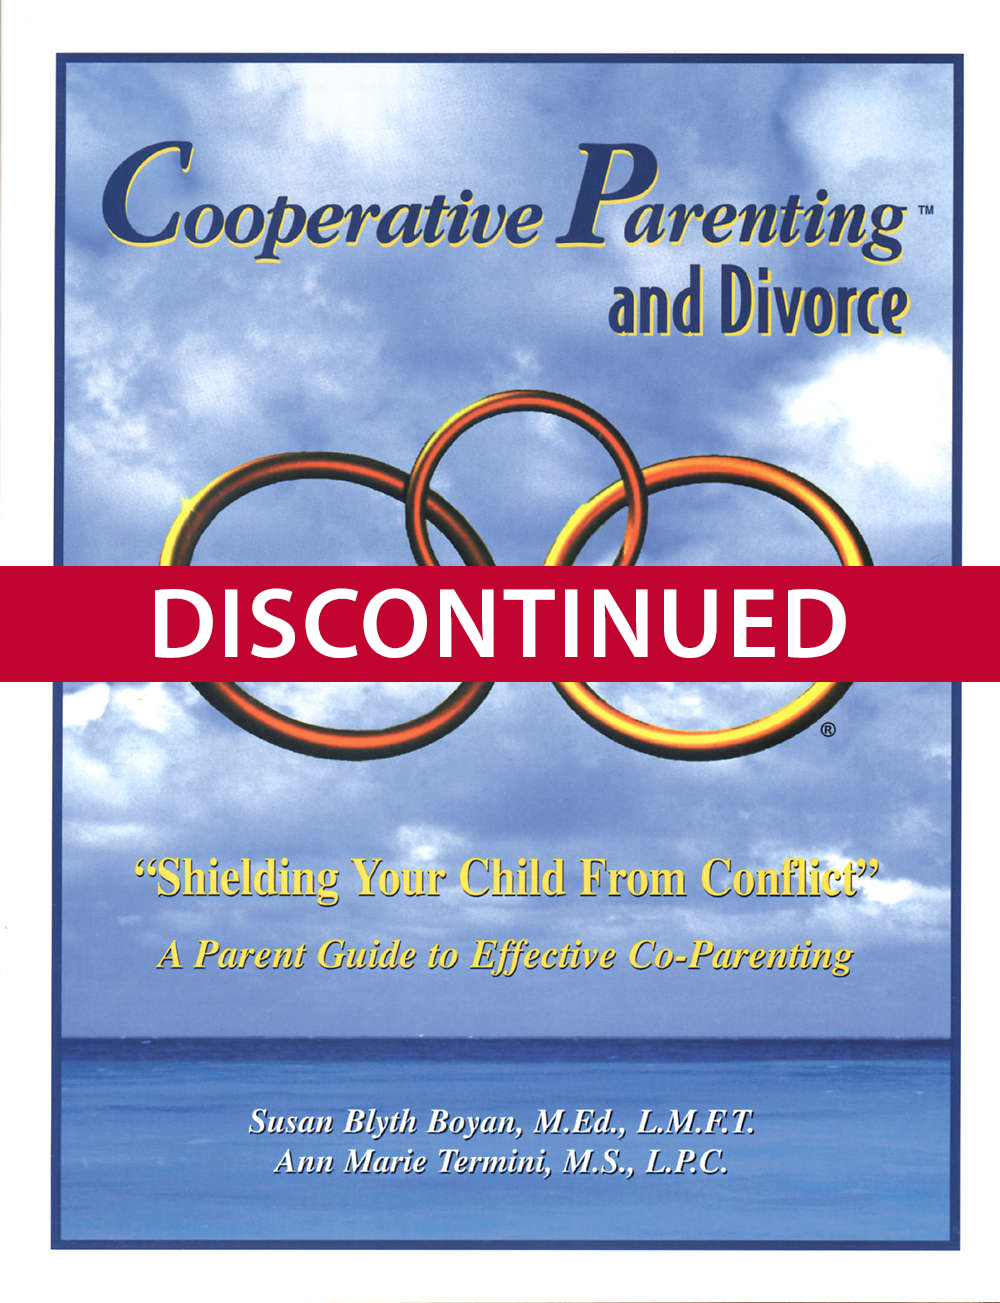 Cooperative Parenting and Divorce Parent's Guide - Discontinued